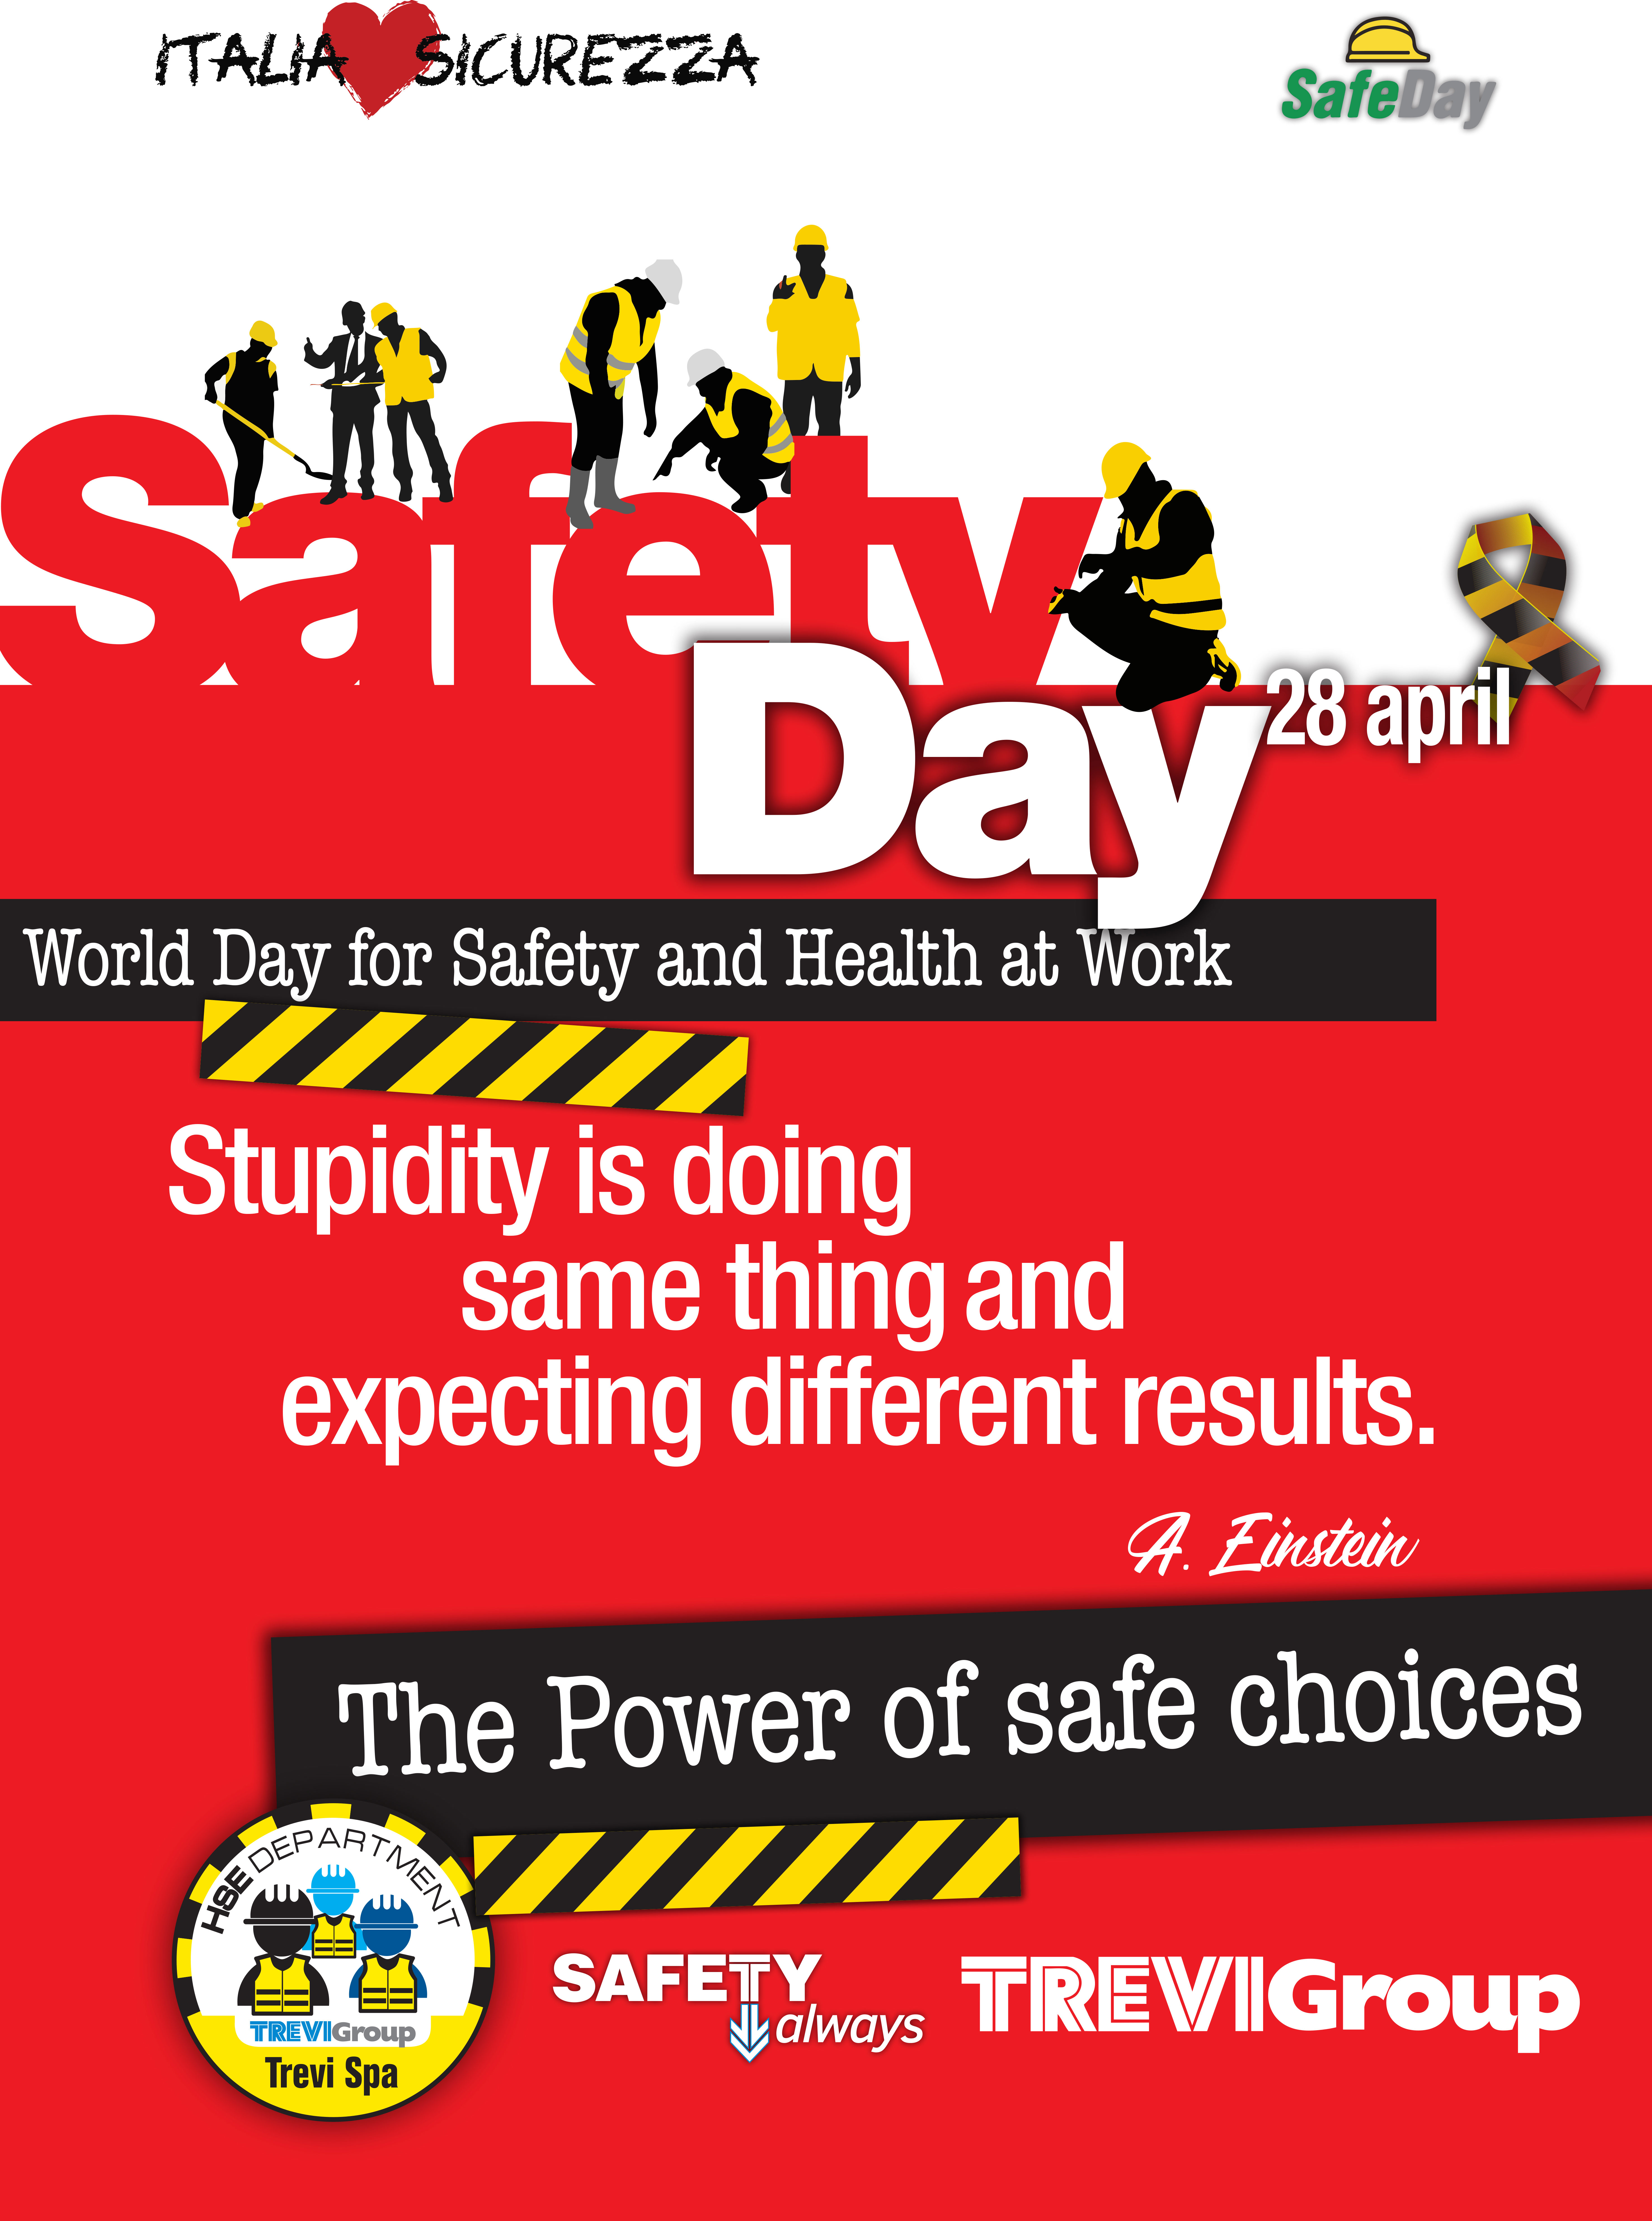 <p>World Day for Safety and Health at Work</p>
